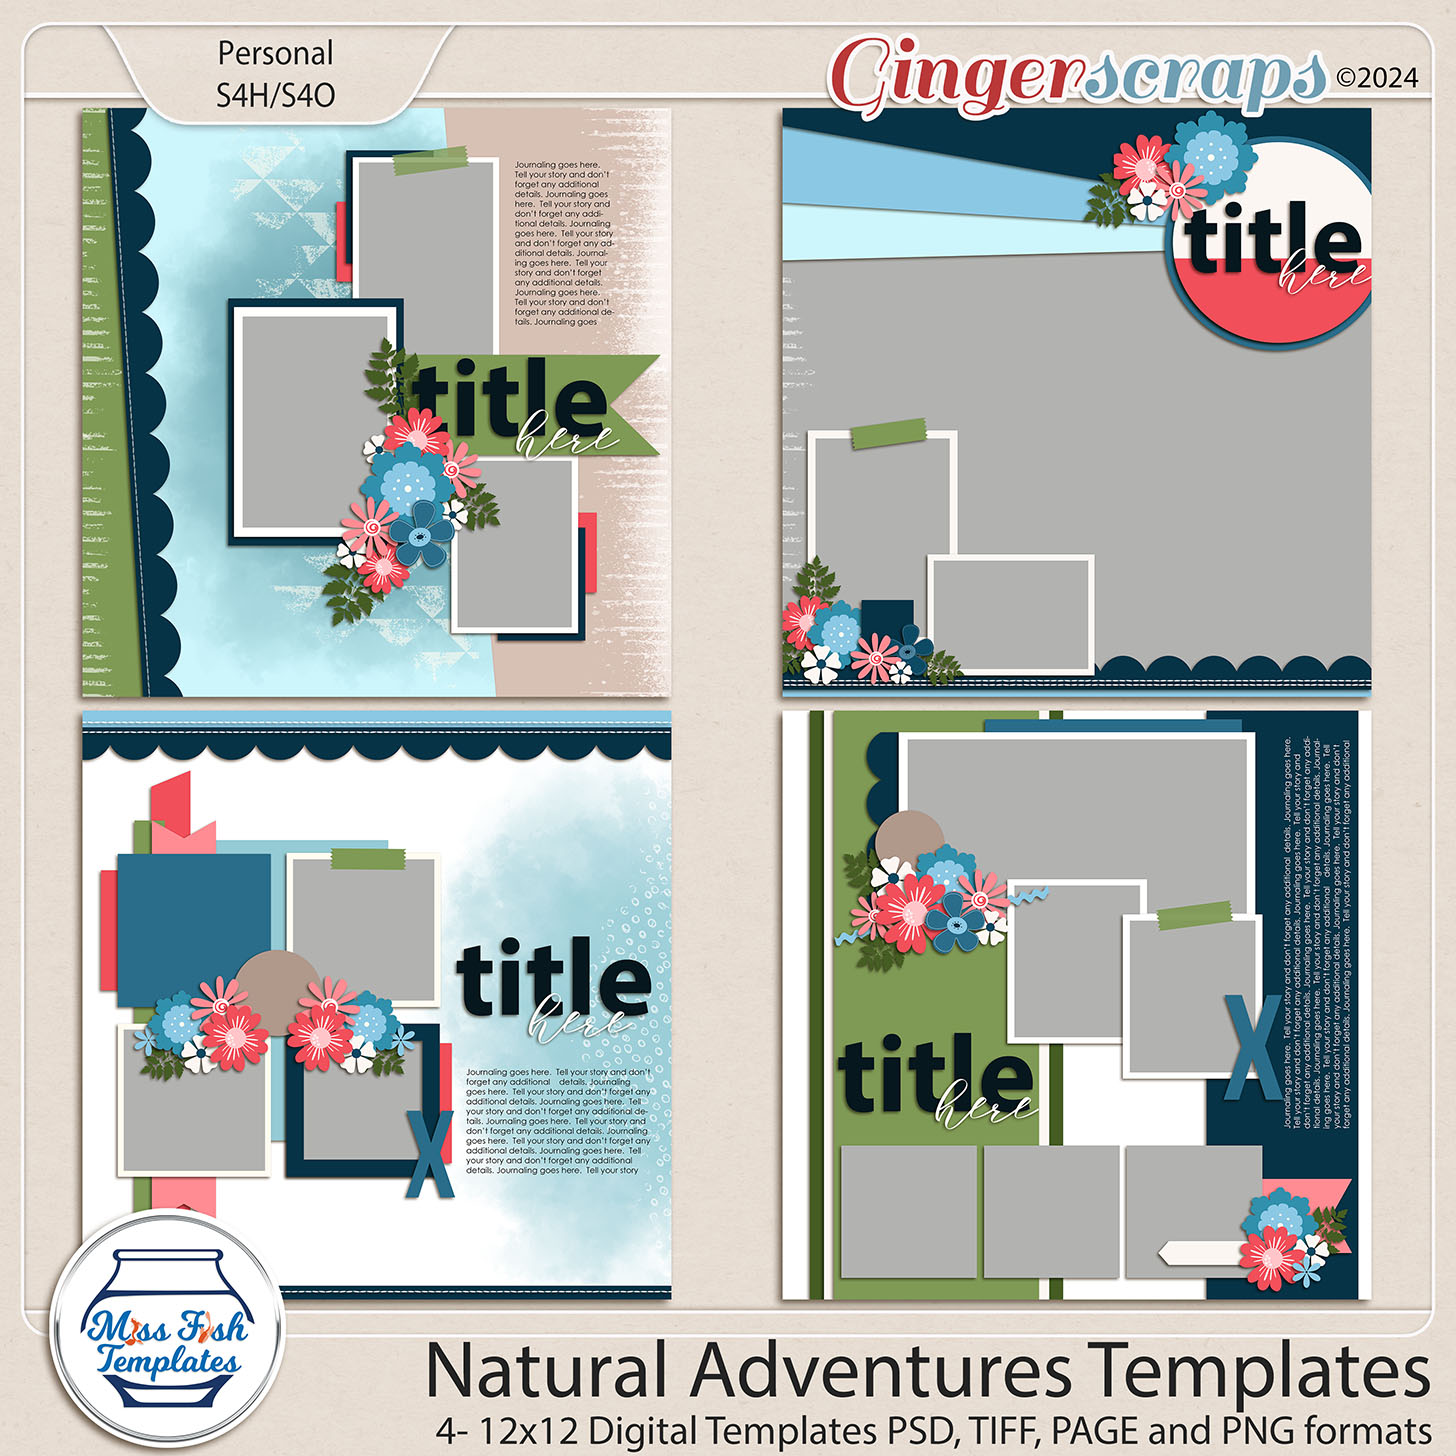 Natural Adventures Templates by Miss Fish